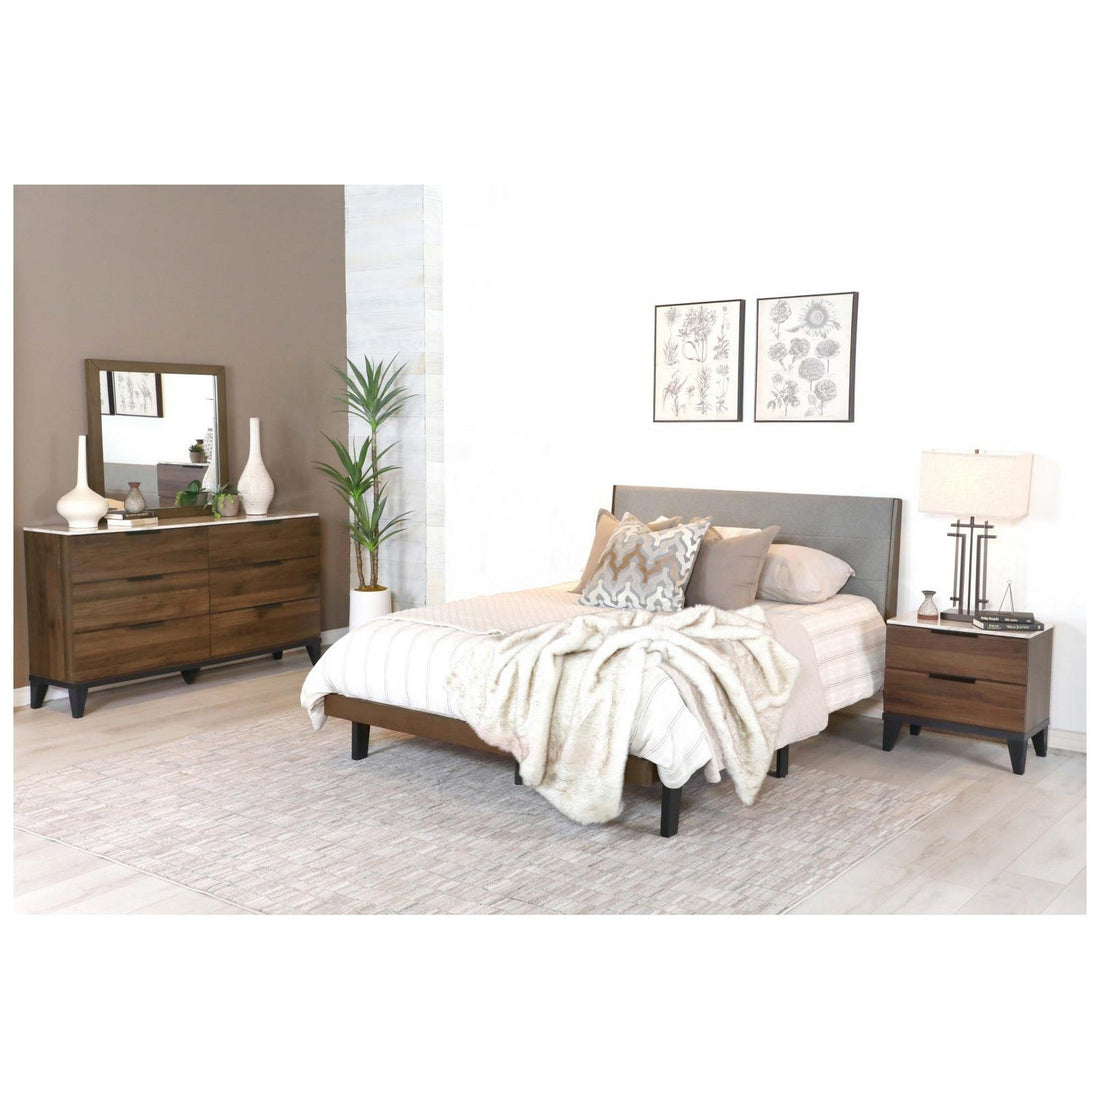 Mays 4-piece Upholstered Queen Bedroom Set Walnut Brown and Grey 215961Q-S4